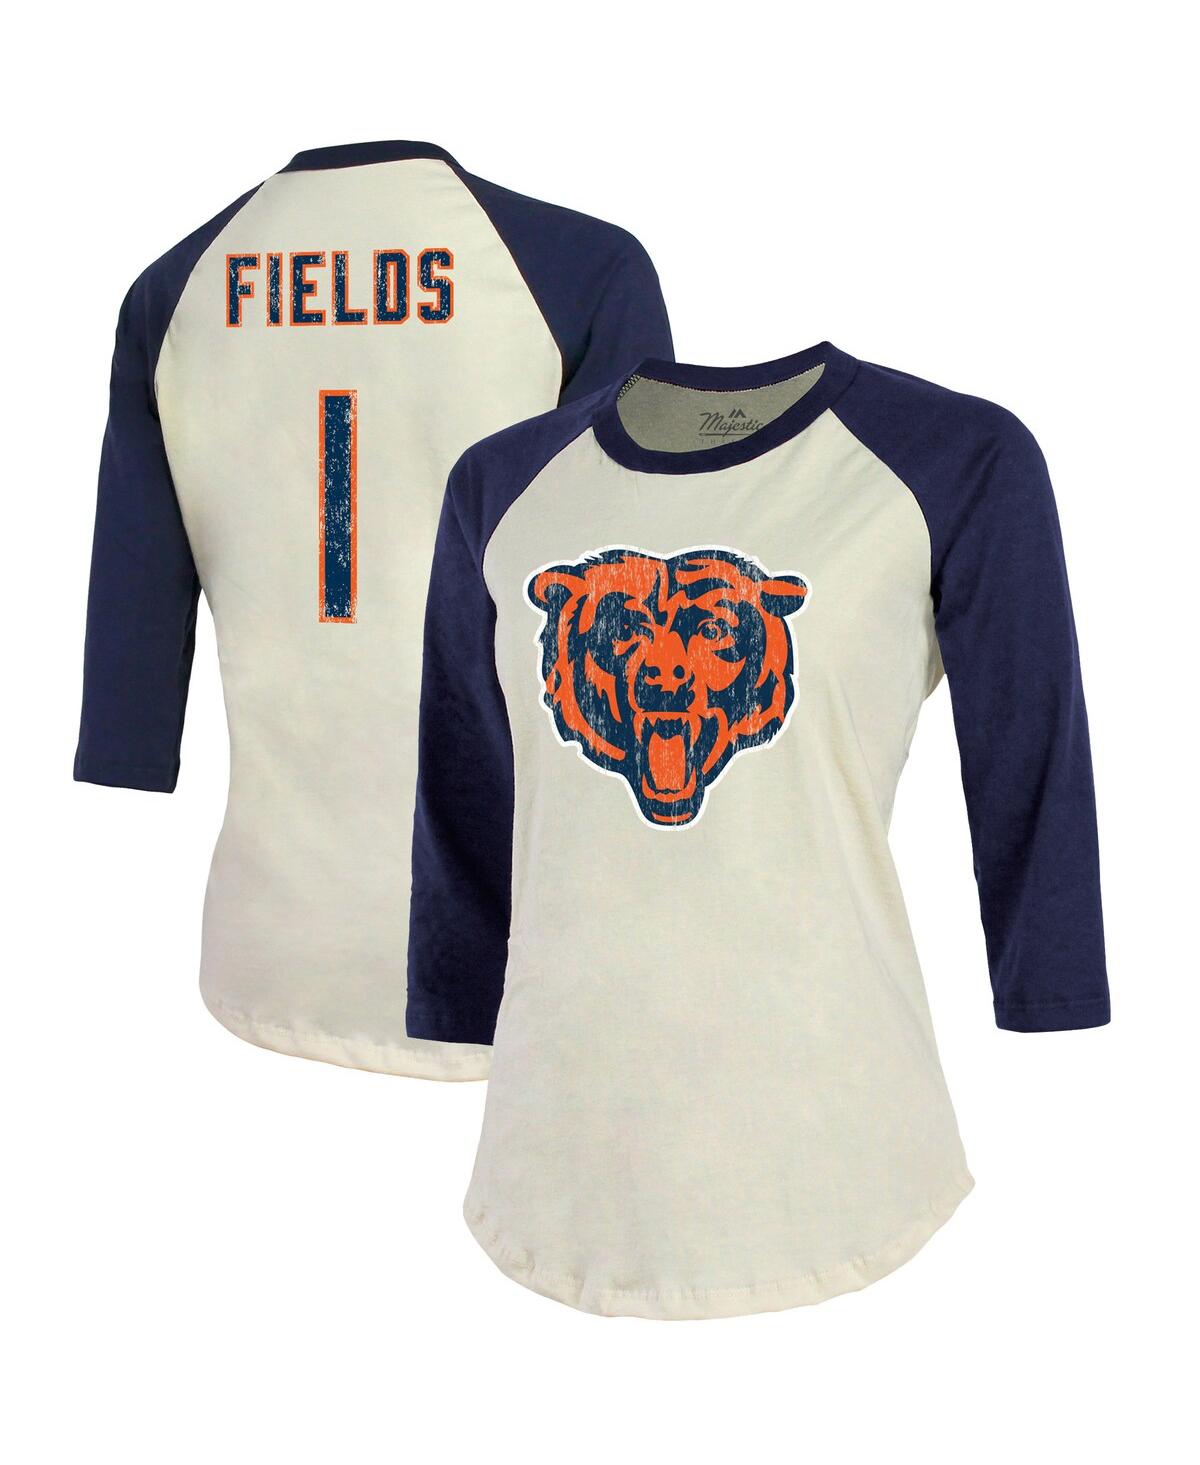 Women's Justin Fields Cream and Navy Chicago Bears Player Name Number Raglan 3 and 4-Sleeve T-Shirt - Cream, Navy